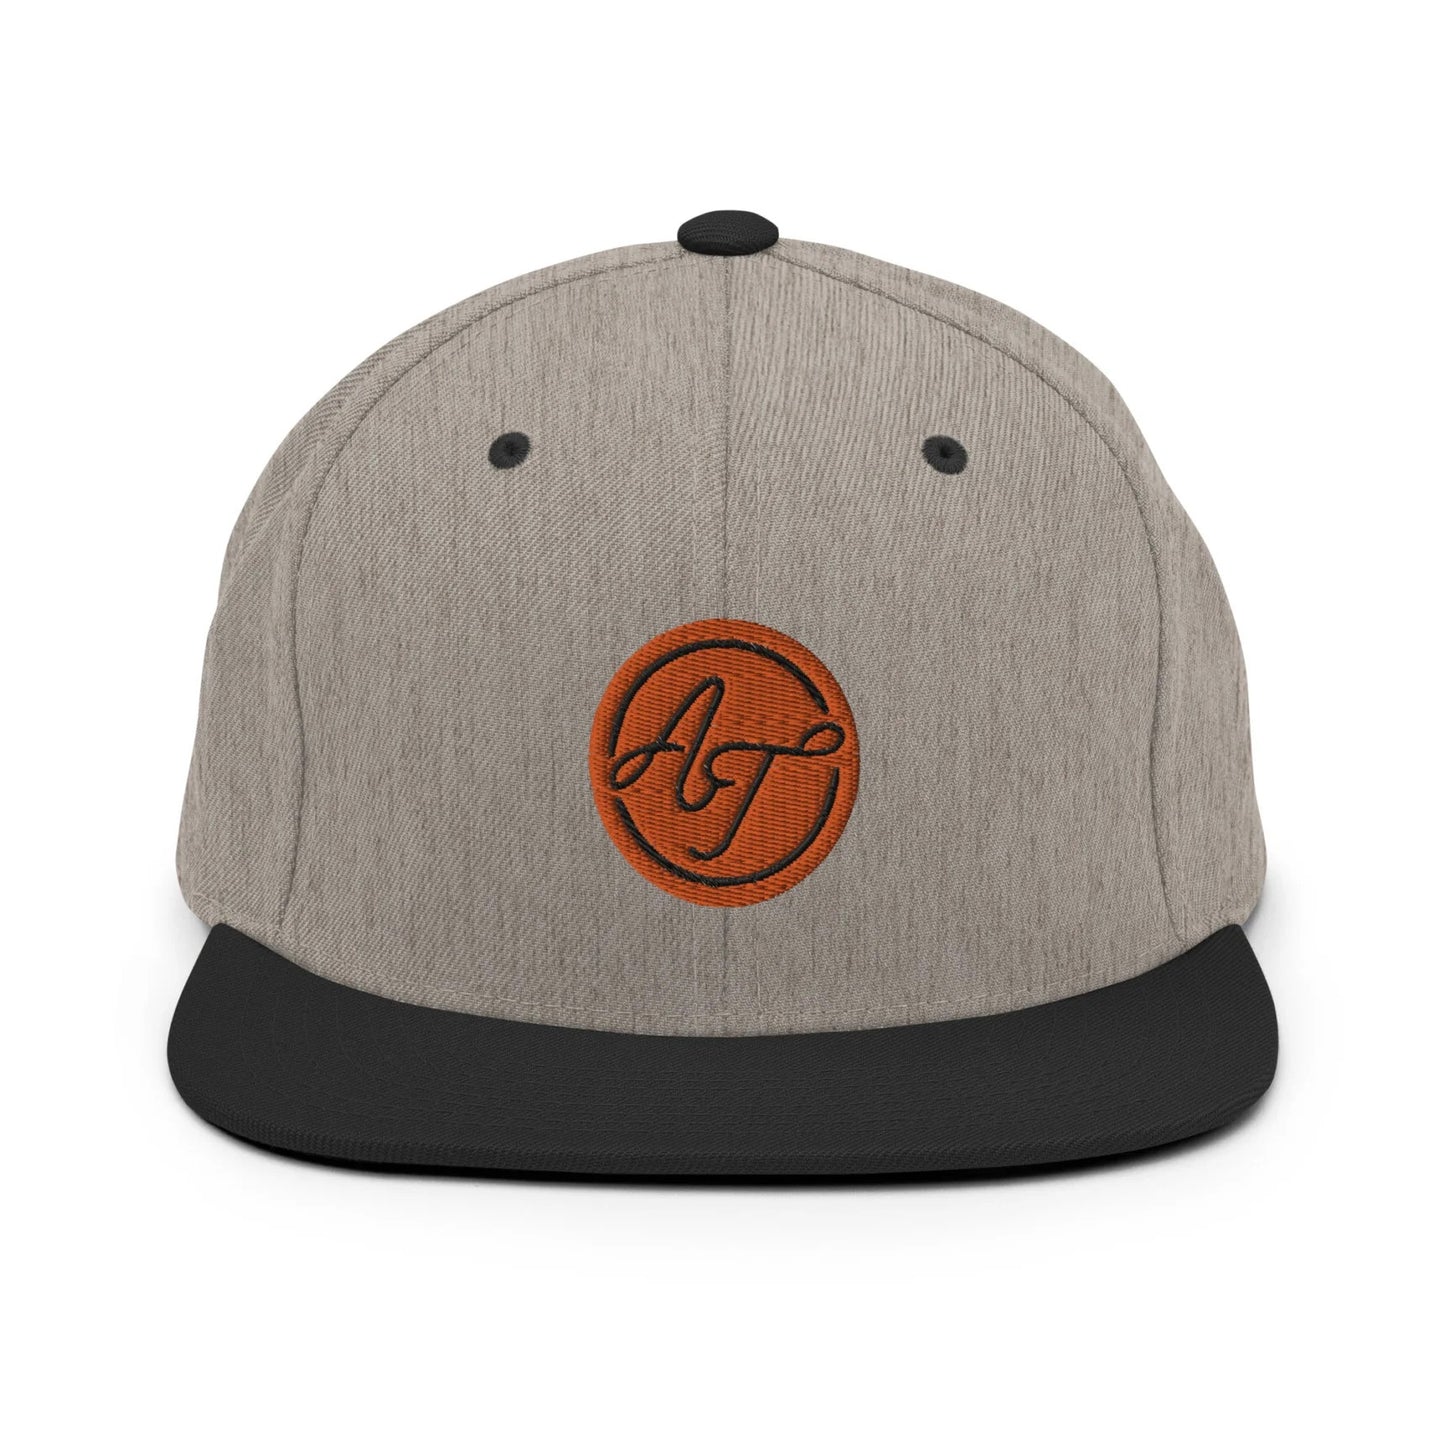 Thuuuuney ShowZone snapback hat in heather grey with black brim and accents